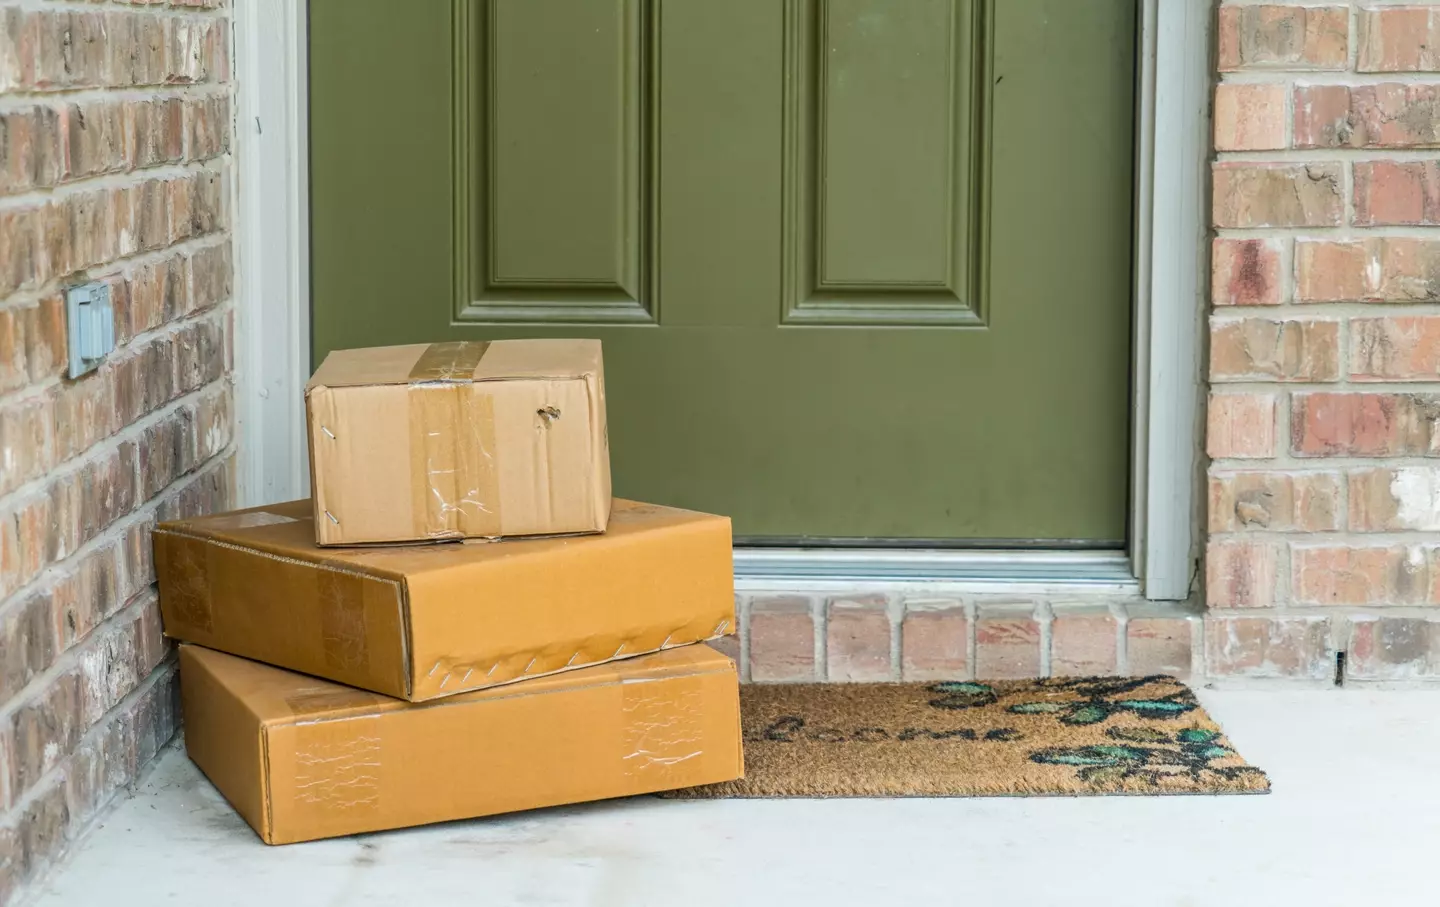 For most couriers, you don't have to open the door (